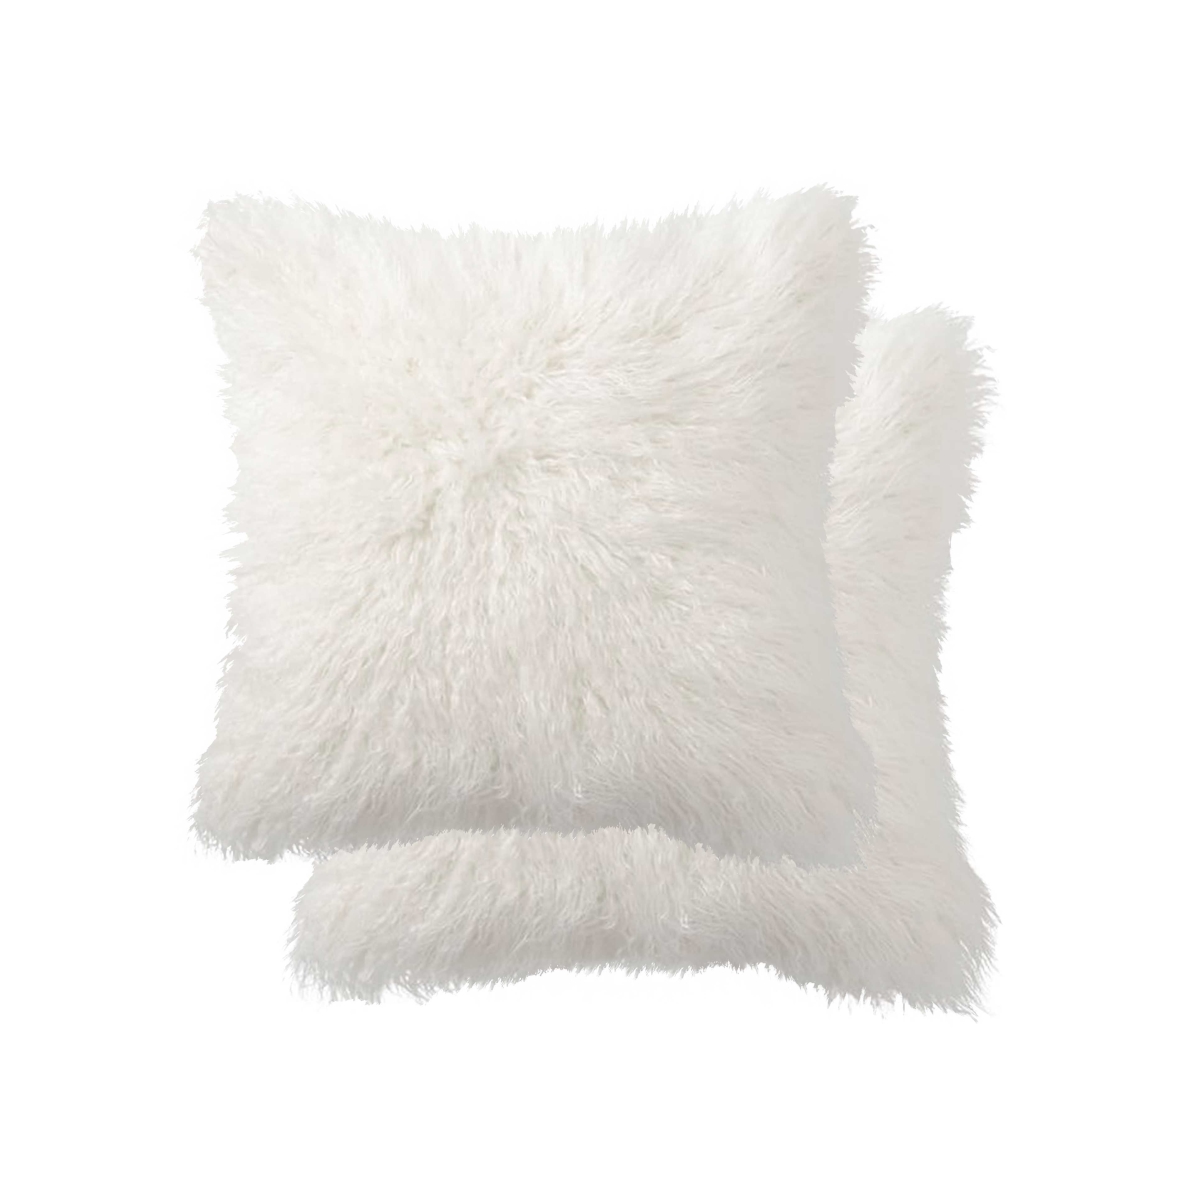 Home Roots Beddings 332242 Faux Fur Pillow, Off White - 18 X 18 In. - Pack Of 2